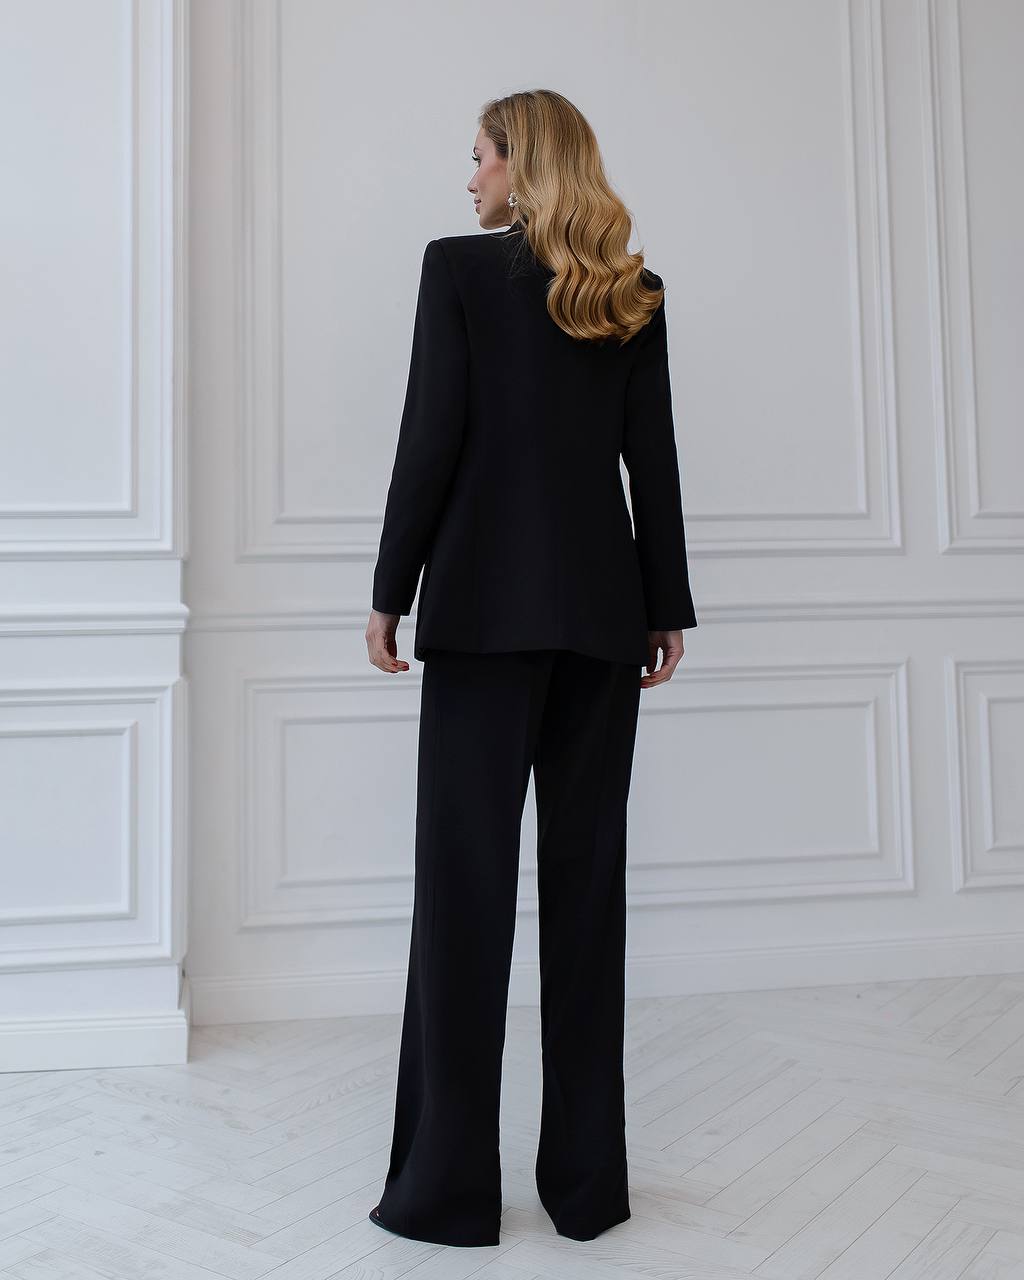 a woman in a black suit stands in front of a white wall